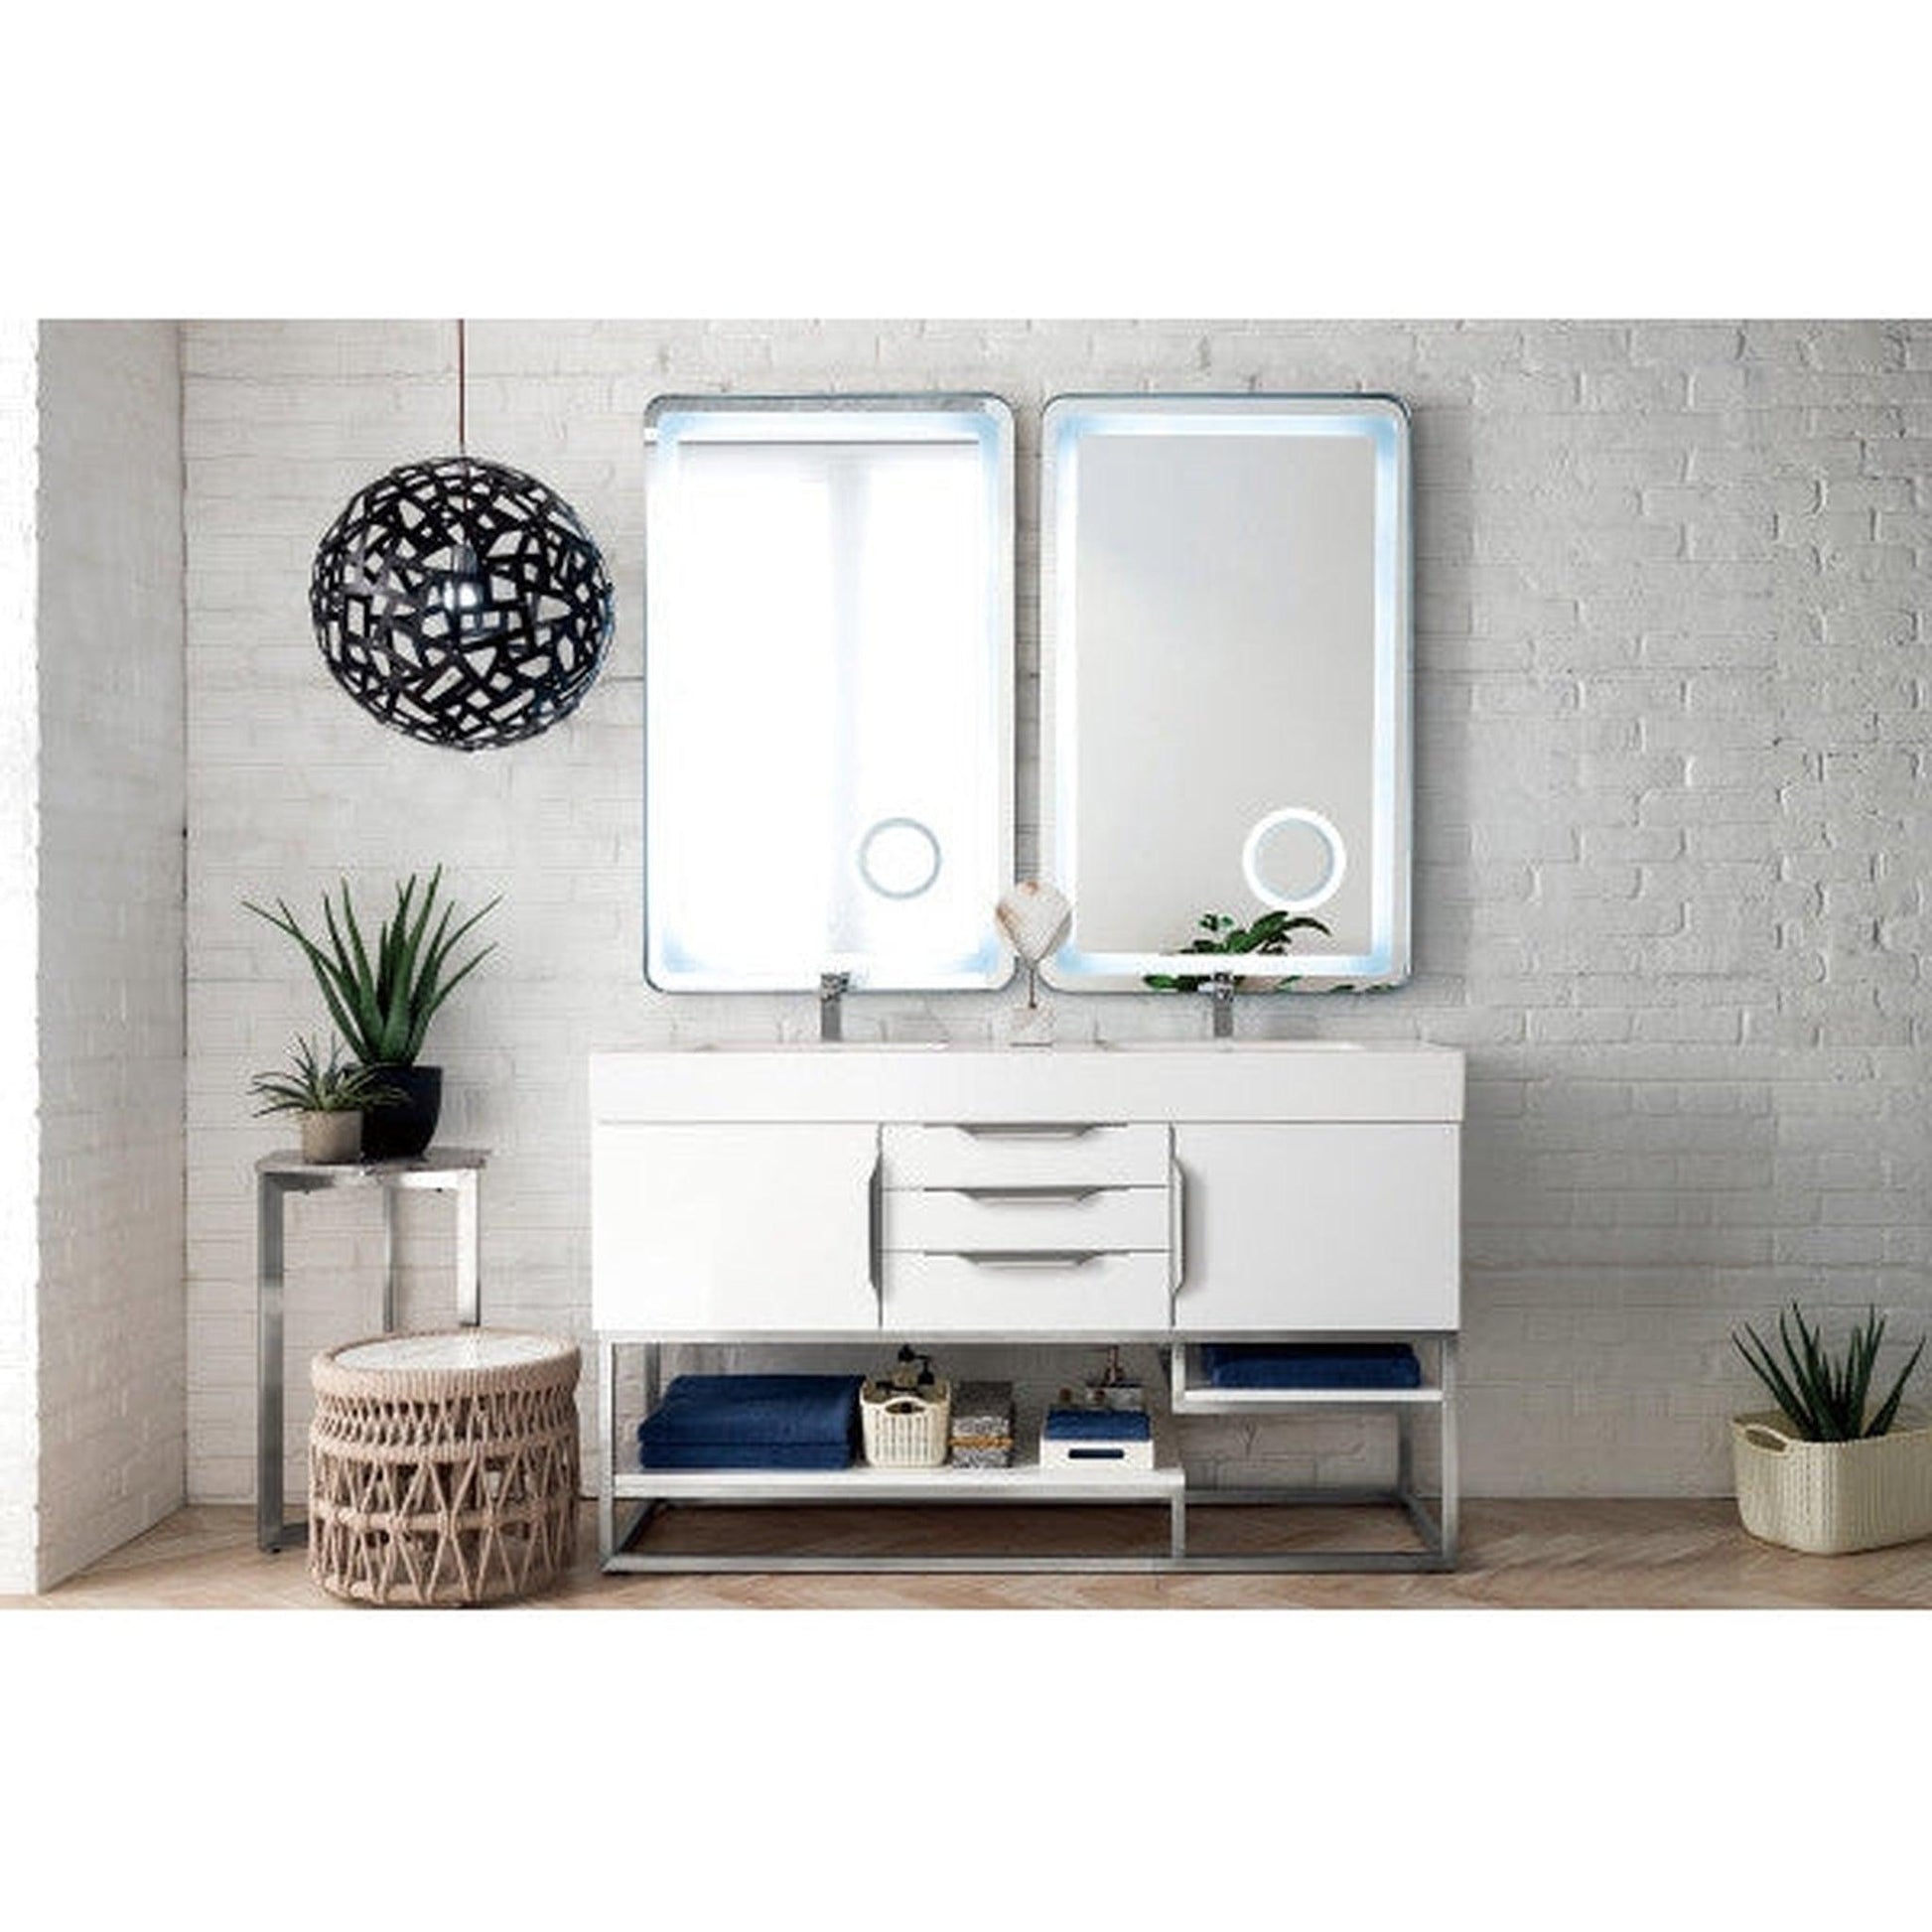 James Martin Columbia 59" Double Glossy White Bathroom Vanity With 6" Glossy White Composite Countertop